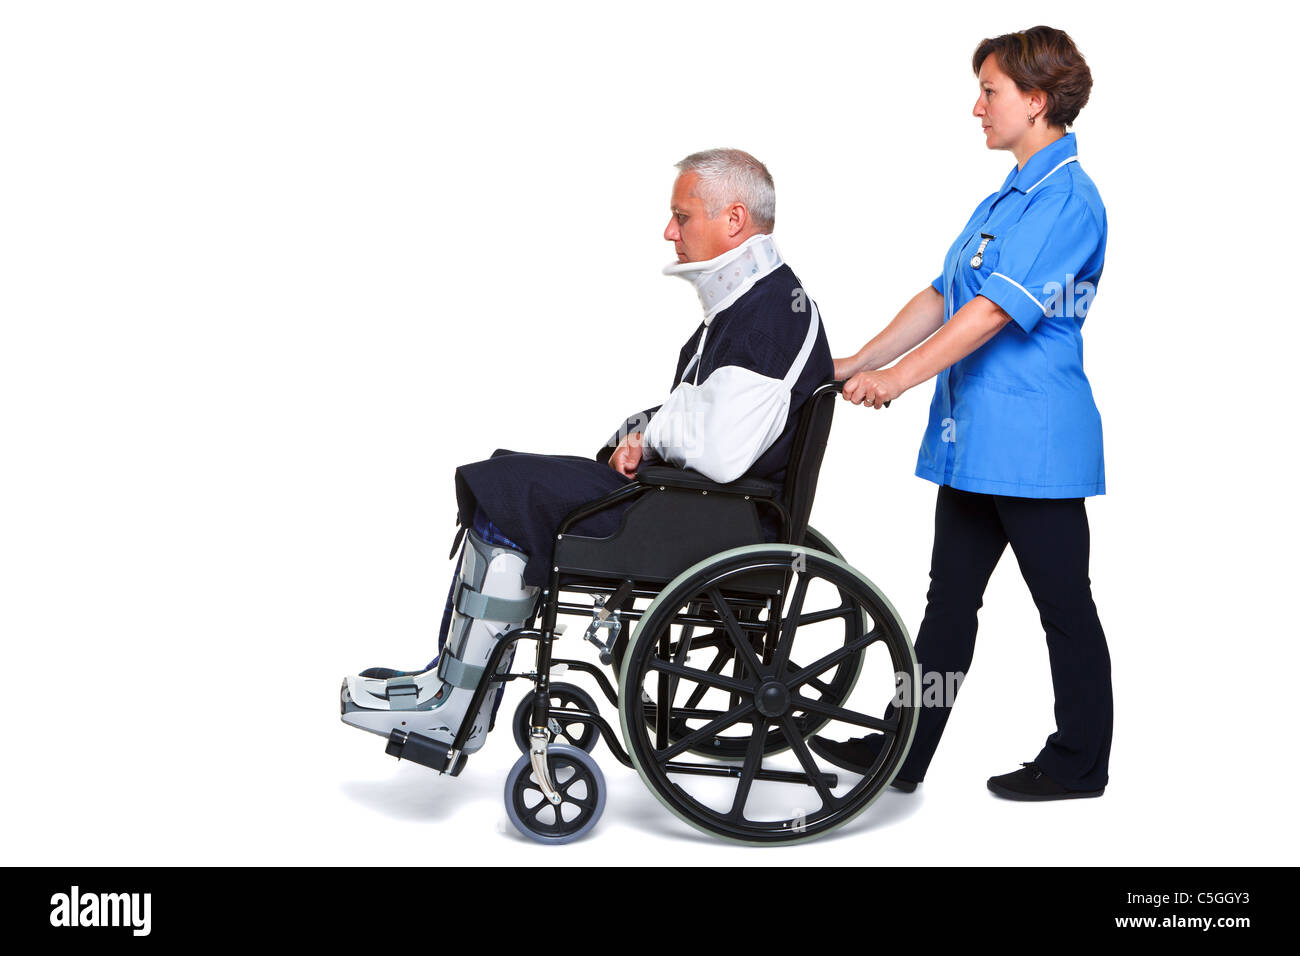 Photo of an injured man in a wheelchair with a female nurse pushing him, isolated on a white background. Stock Photo